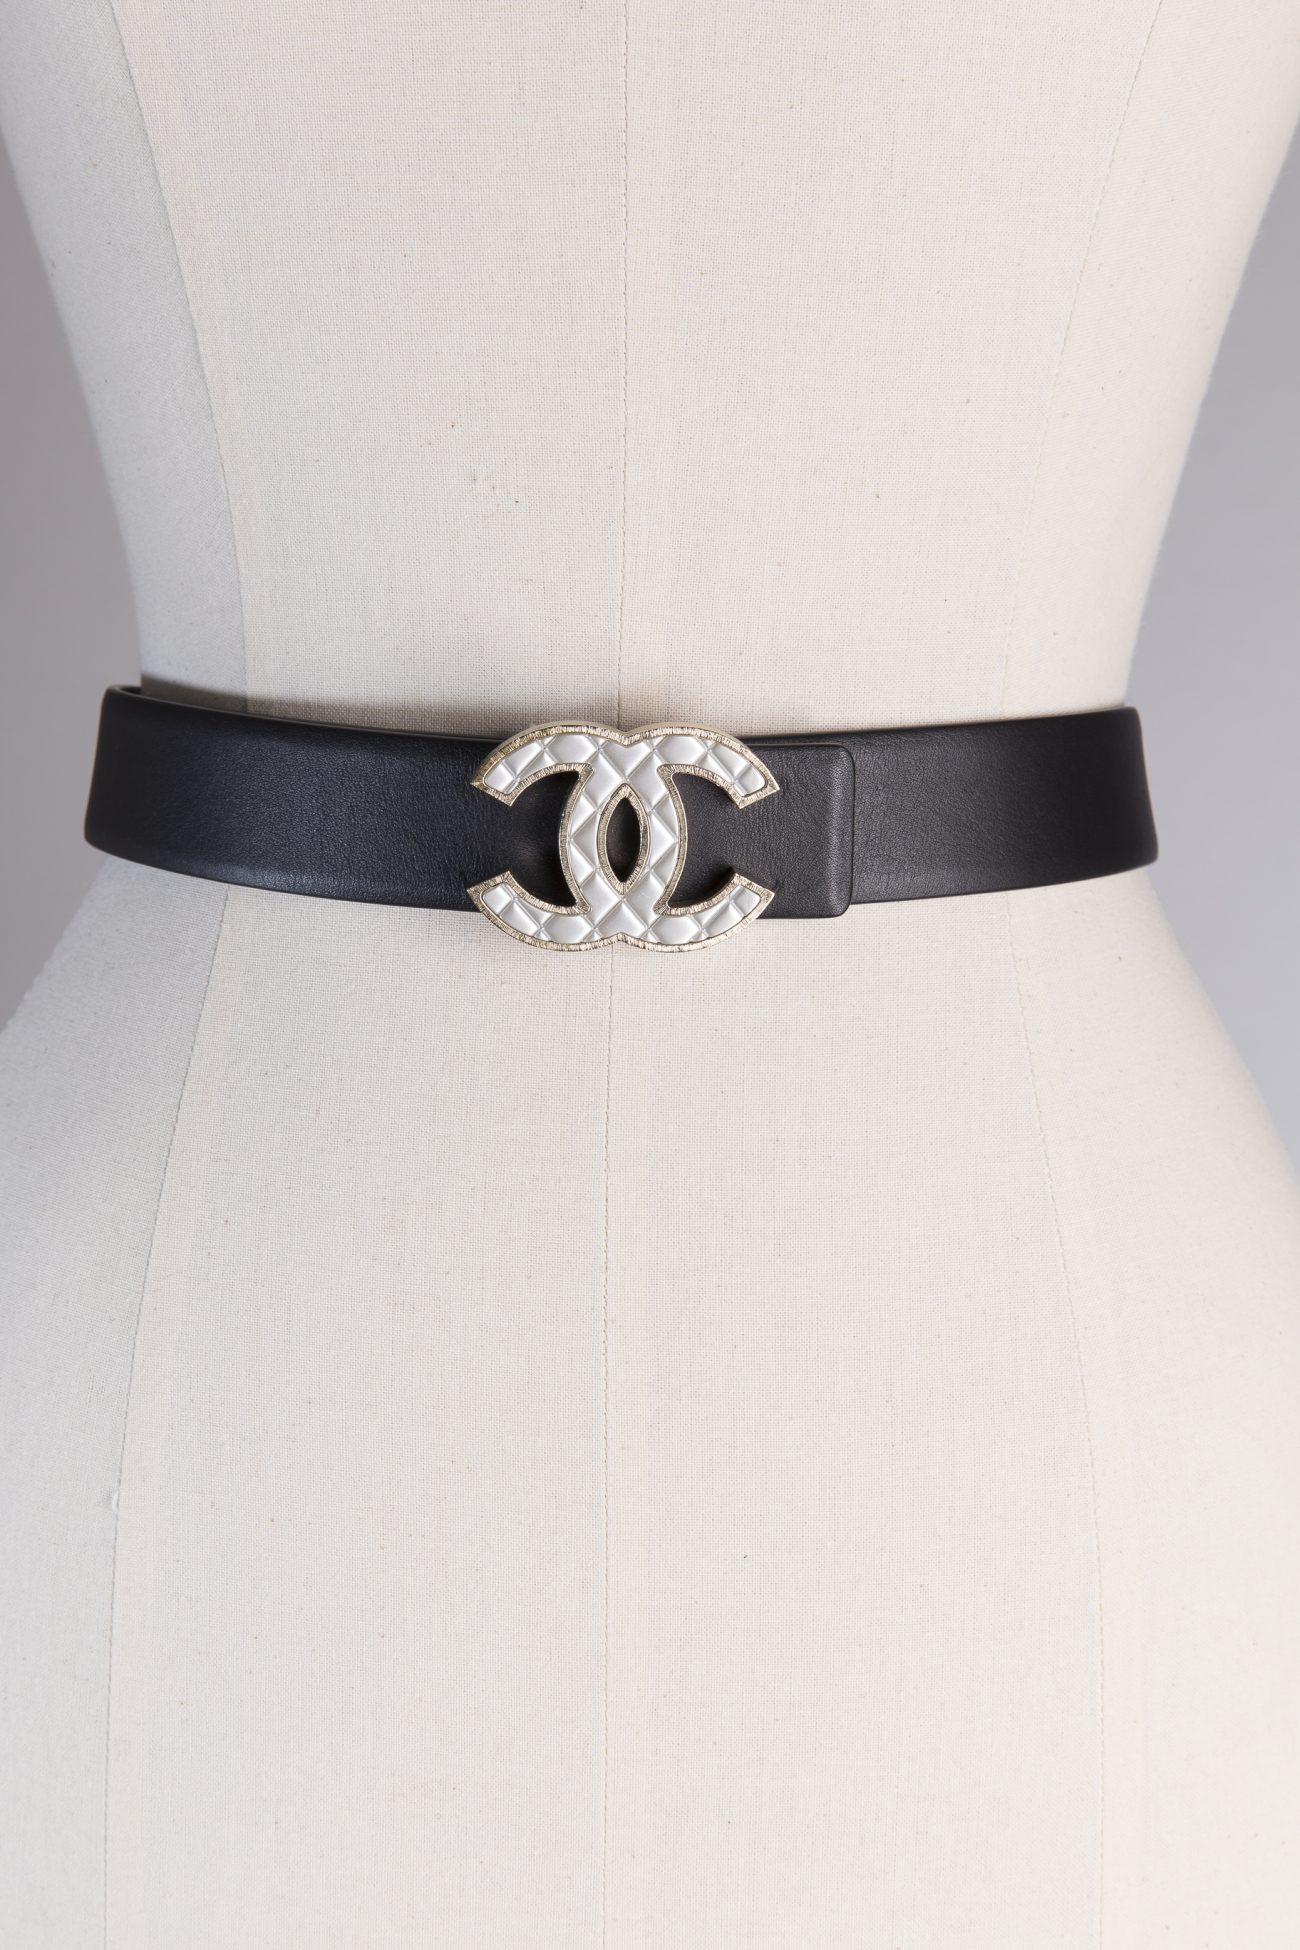 Chanel - Authenticated Belt - Leather Red for Women, Good Condition